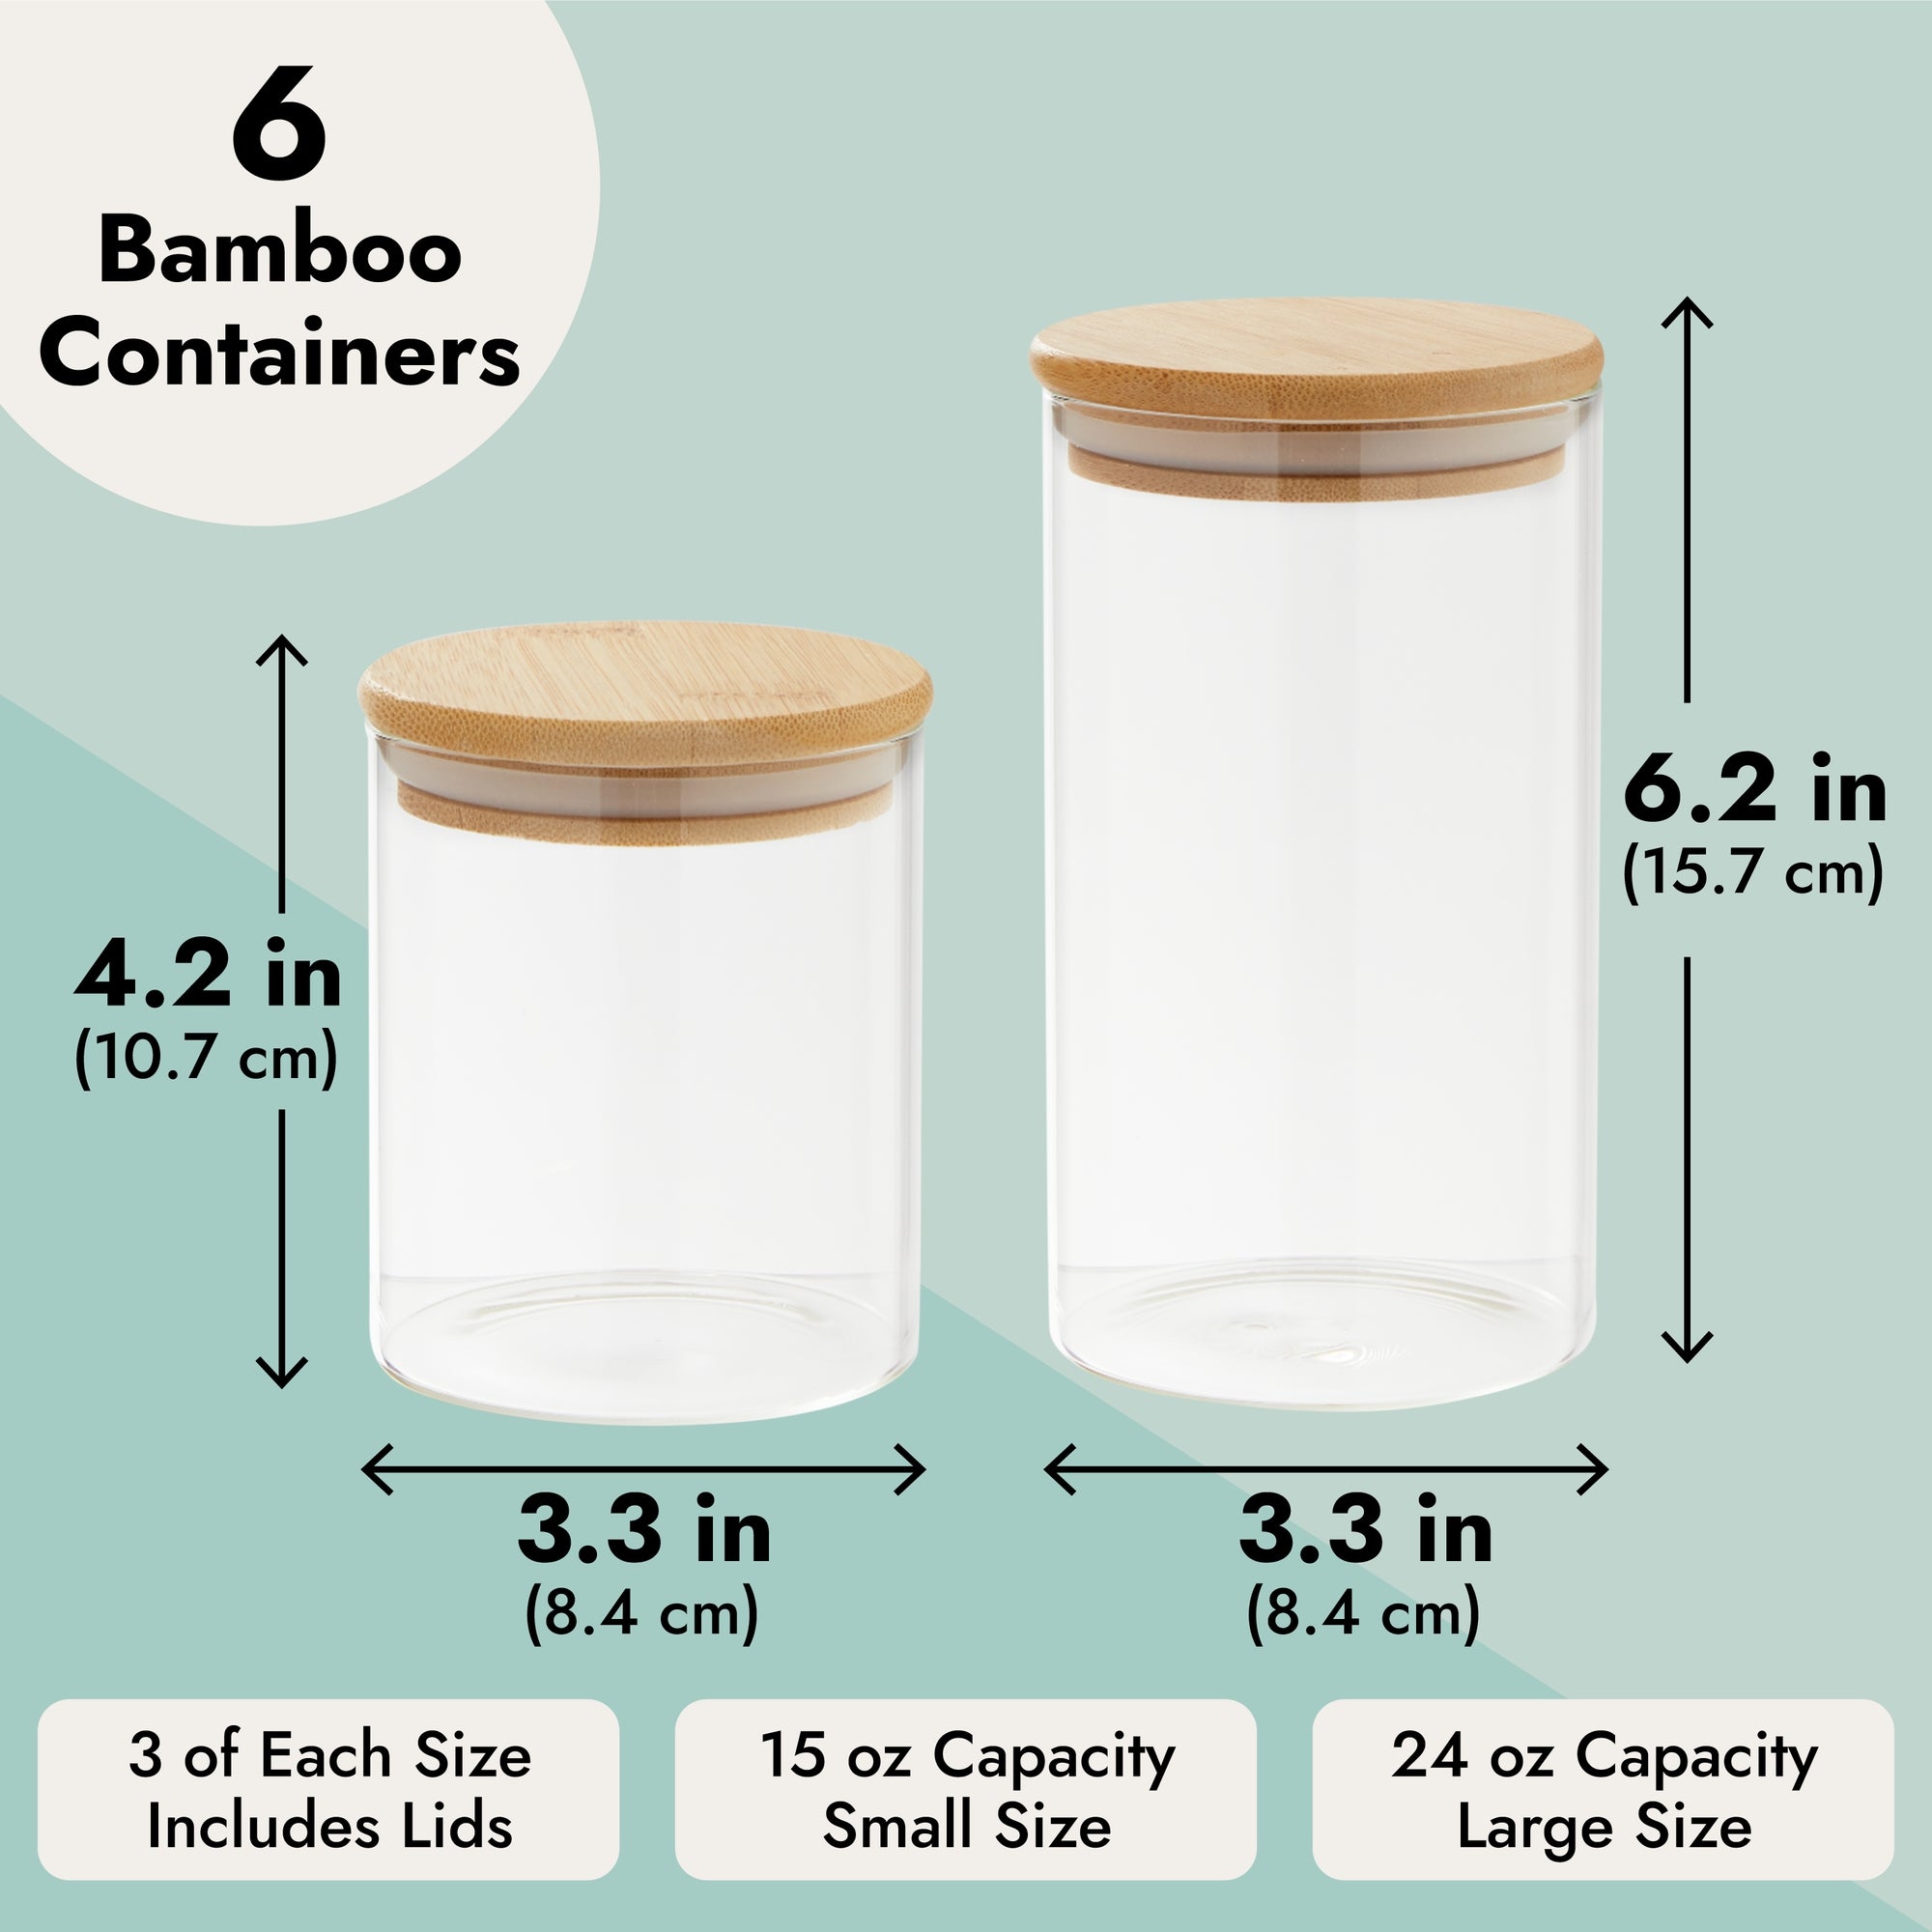 Set of 2 Large Glass Food Storage Containers for Pantry Jars